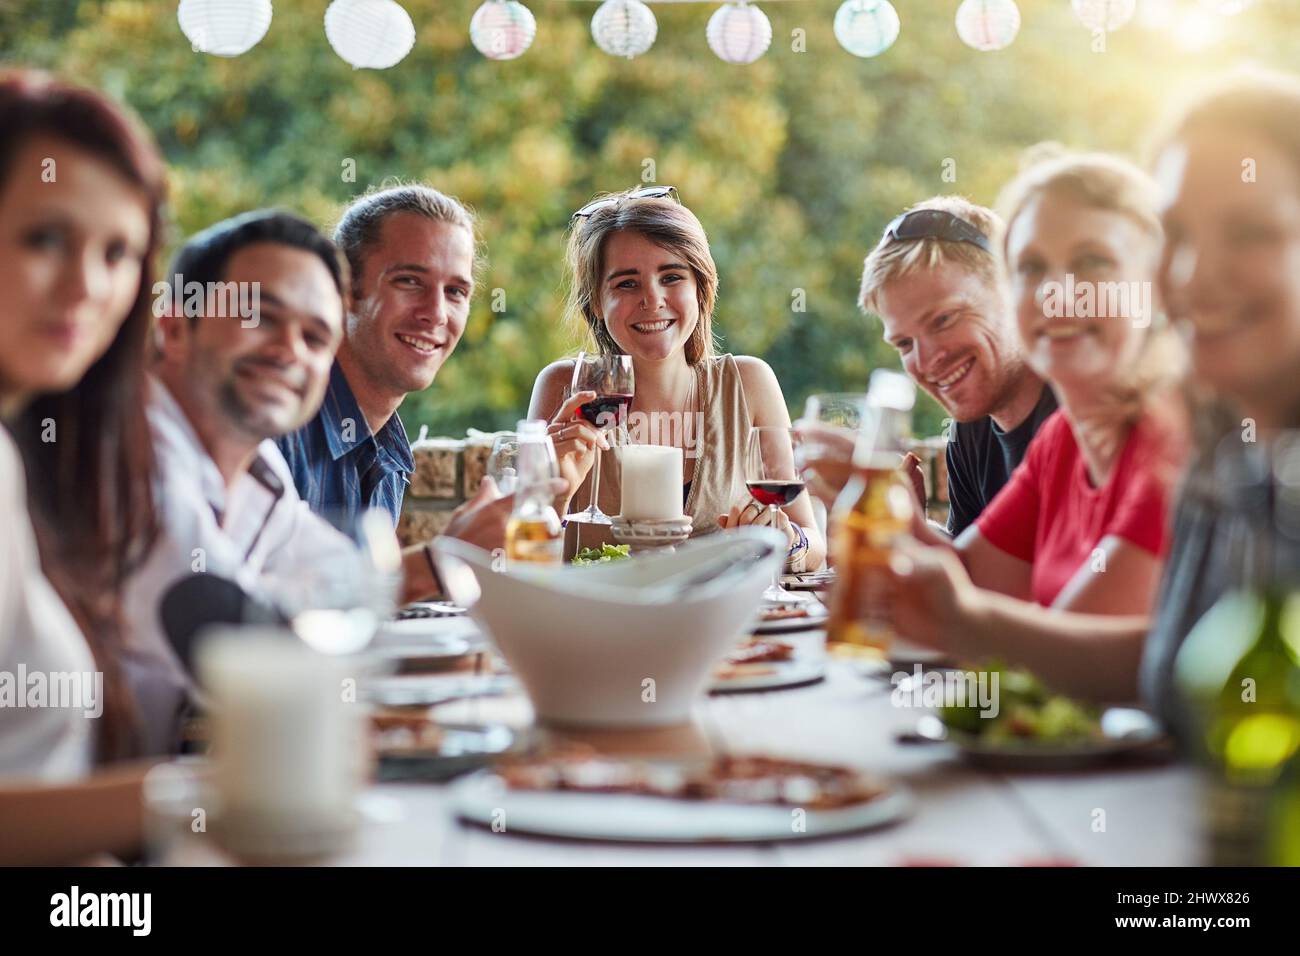 Nothing by good vibes at our table. Portrait of a group of happy young friends sharing a meal at a backyard dinner party. Stock Photo